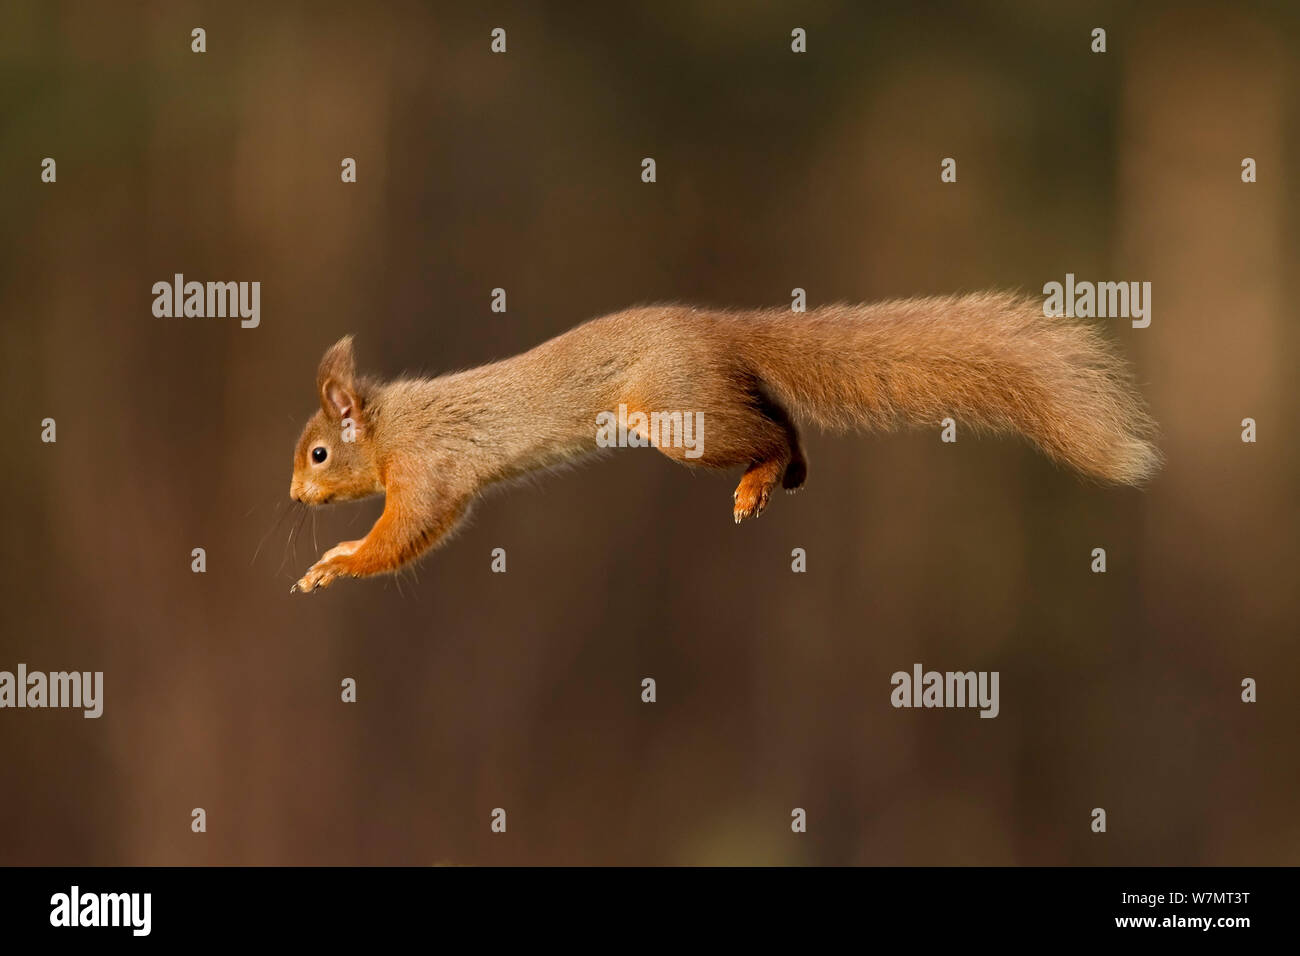 Red squirrel (Sciurus vulgaris) jumping in scots pine forest, Cairngorms National Park, Scotland, March 2012. Stock Photo